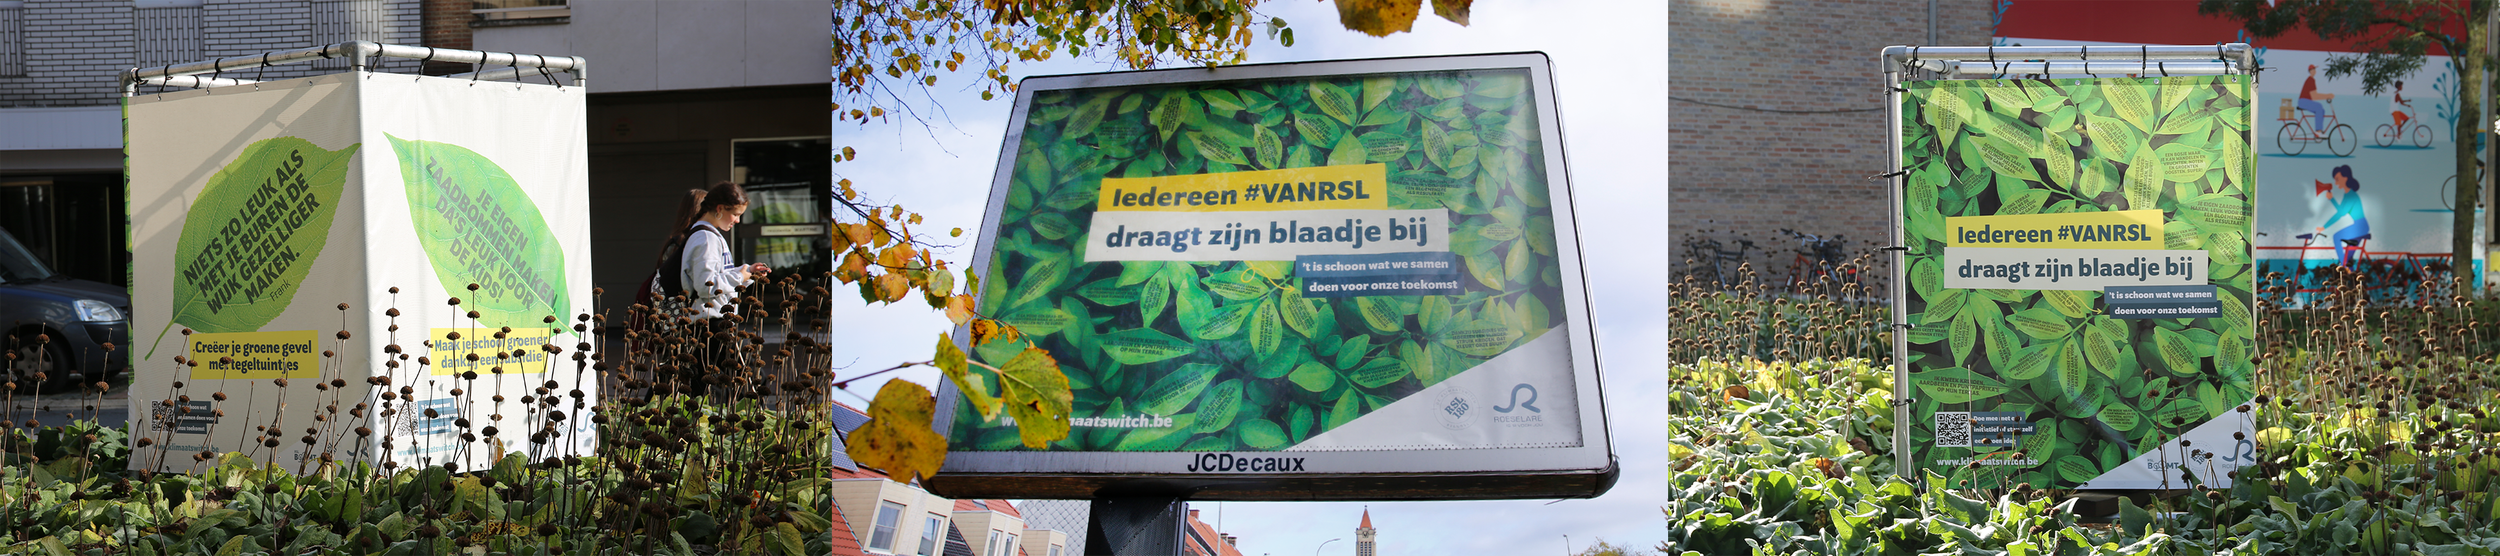 June20: STAD ROESELARE Together for a greener city, street banners